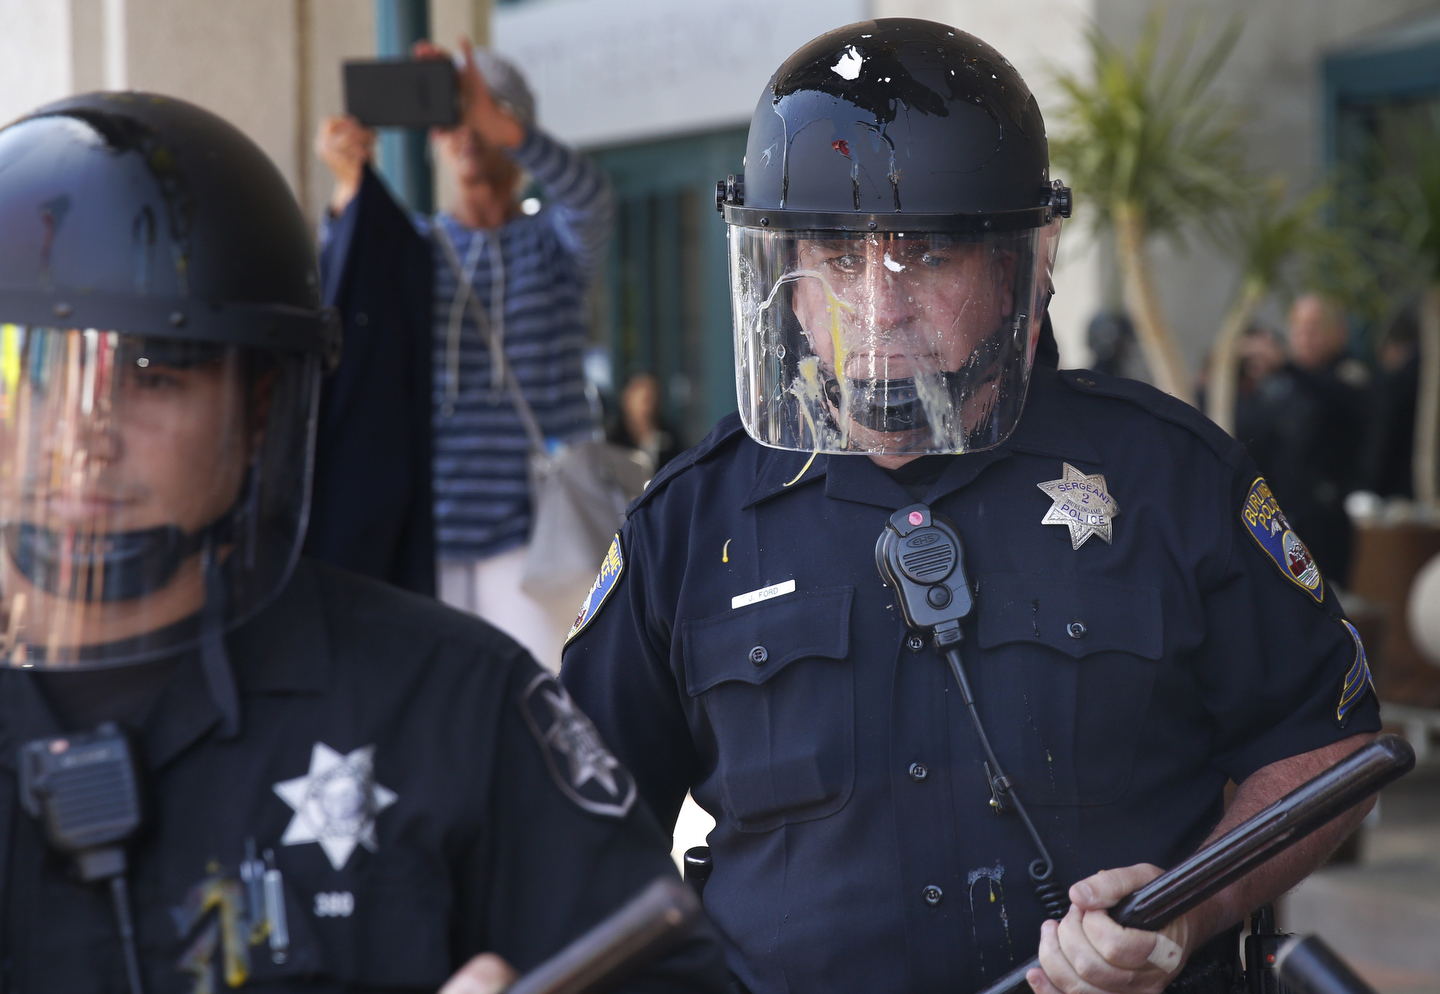 An egg that smashed onto a police officer's face shield runs as he stands between protesters and the front of the Hyatt Regency during the first day of the California Republican Party Convention which featured speeches from Presidential candidates Donald Trump and John Kasich among others April 29, 2016 in Burlingame, Calif.